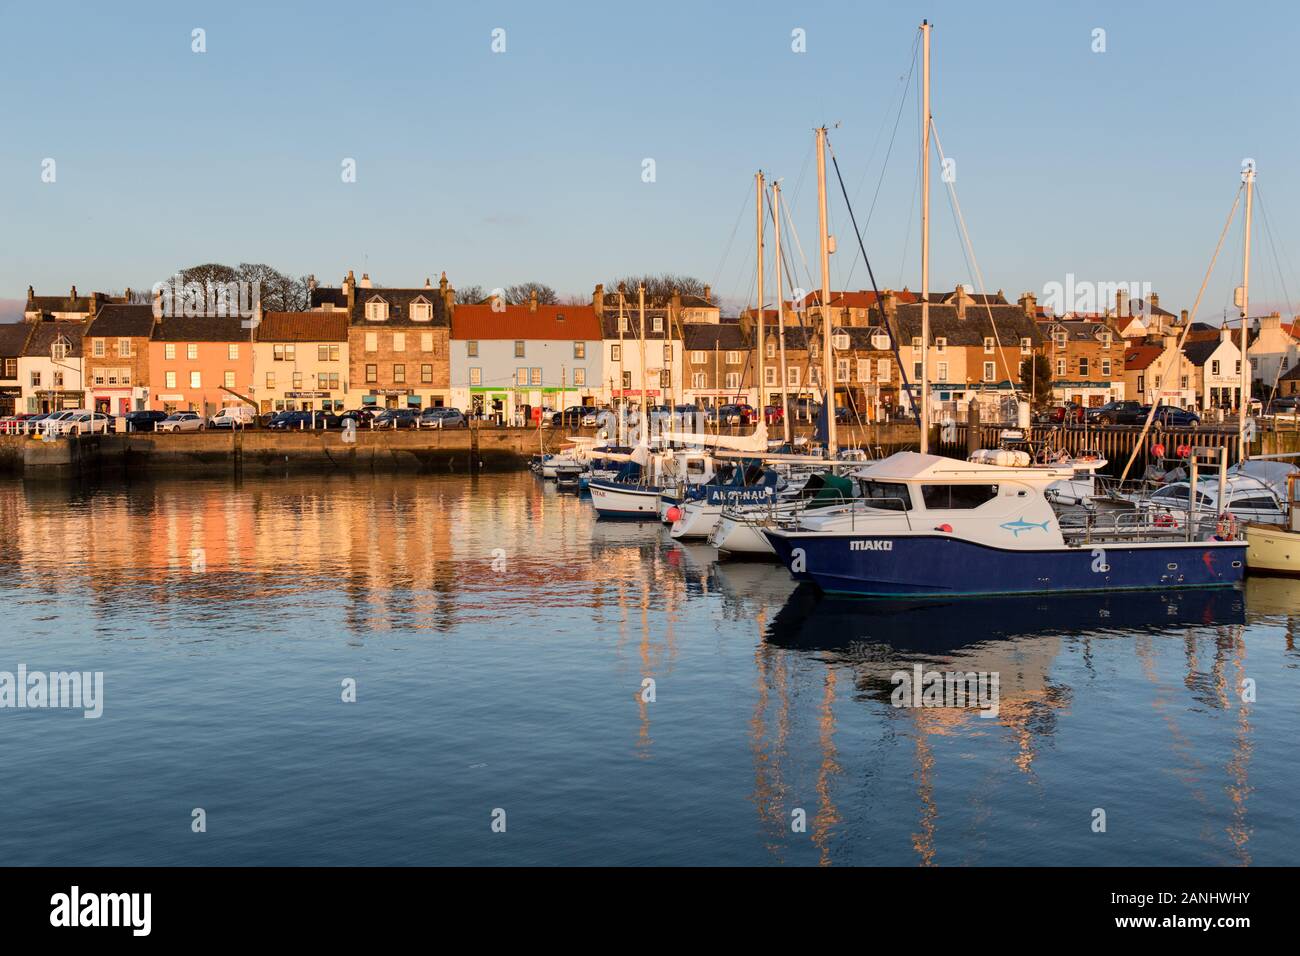 Town of Anstruther, Scotland. Picturesque sunset view of leisure and fishing boats berthed at Anstruther Harbour. Stock Photo